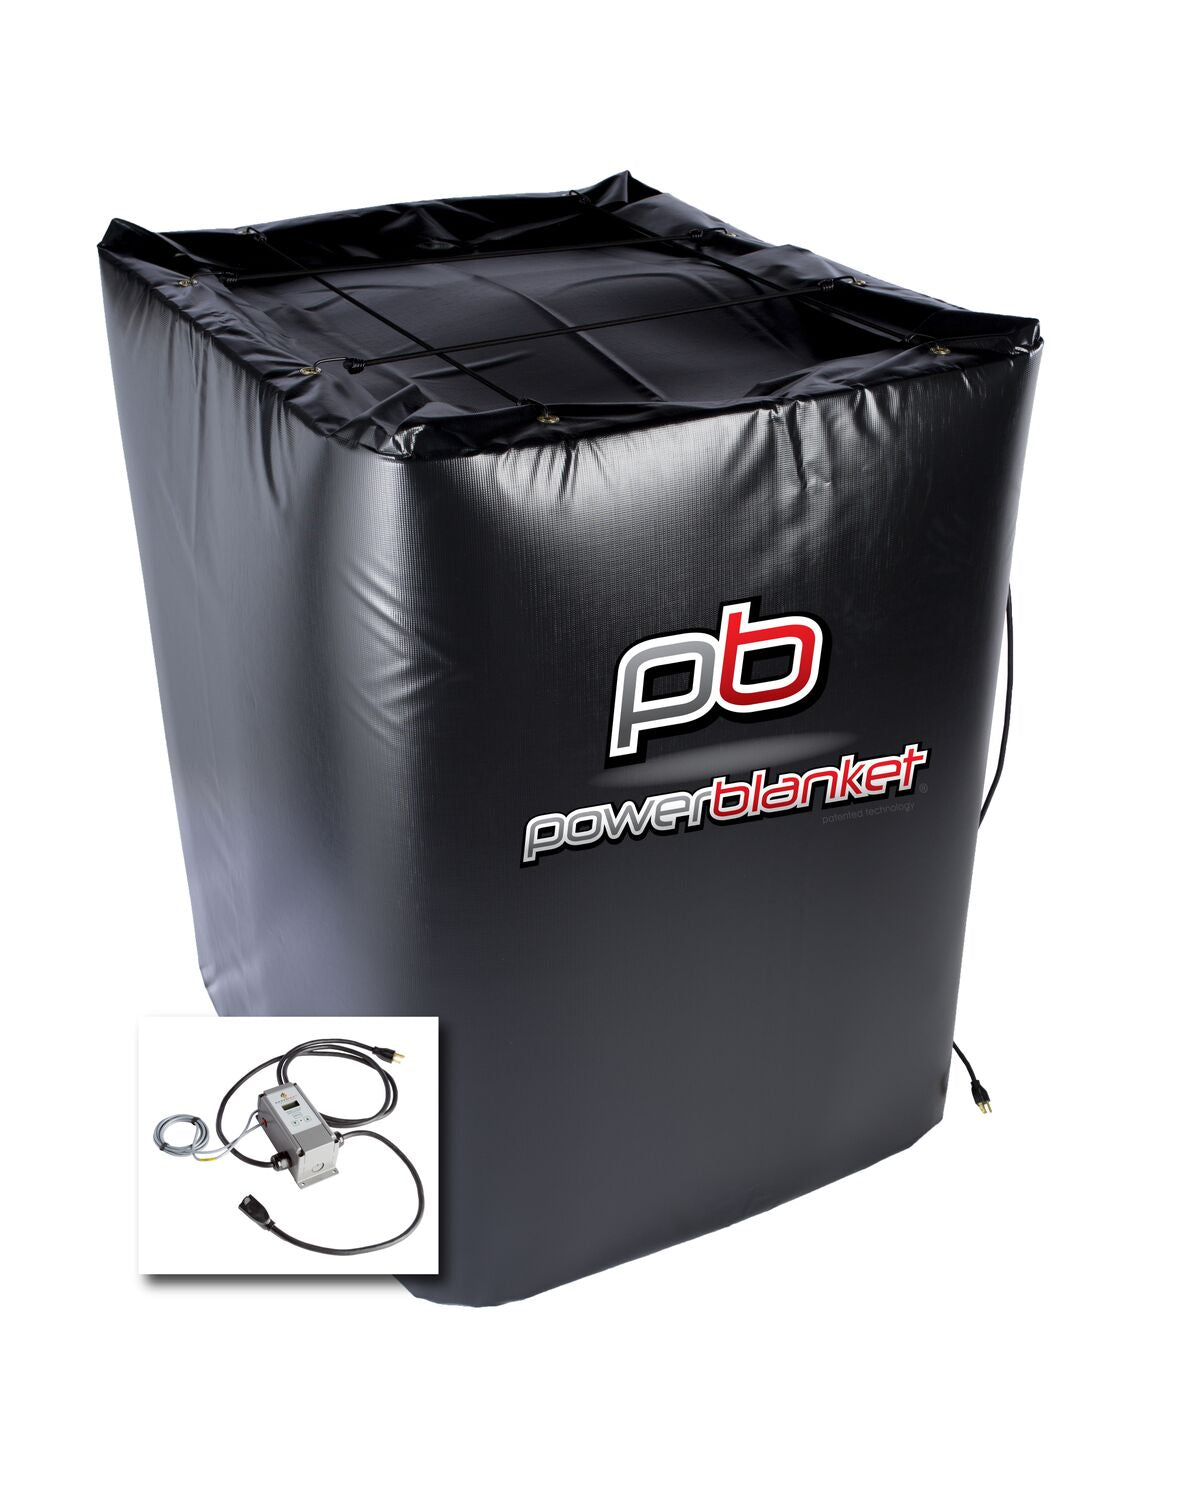 Powerblanket TH254-240V Tote Heater from HeatAuthority.com